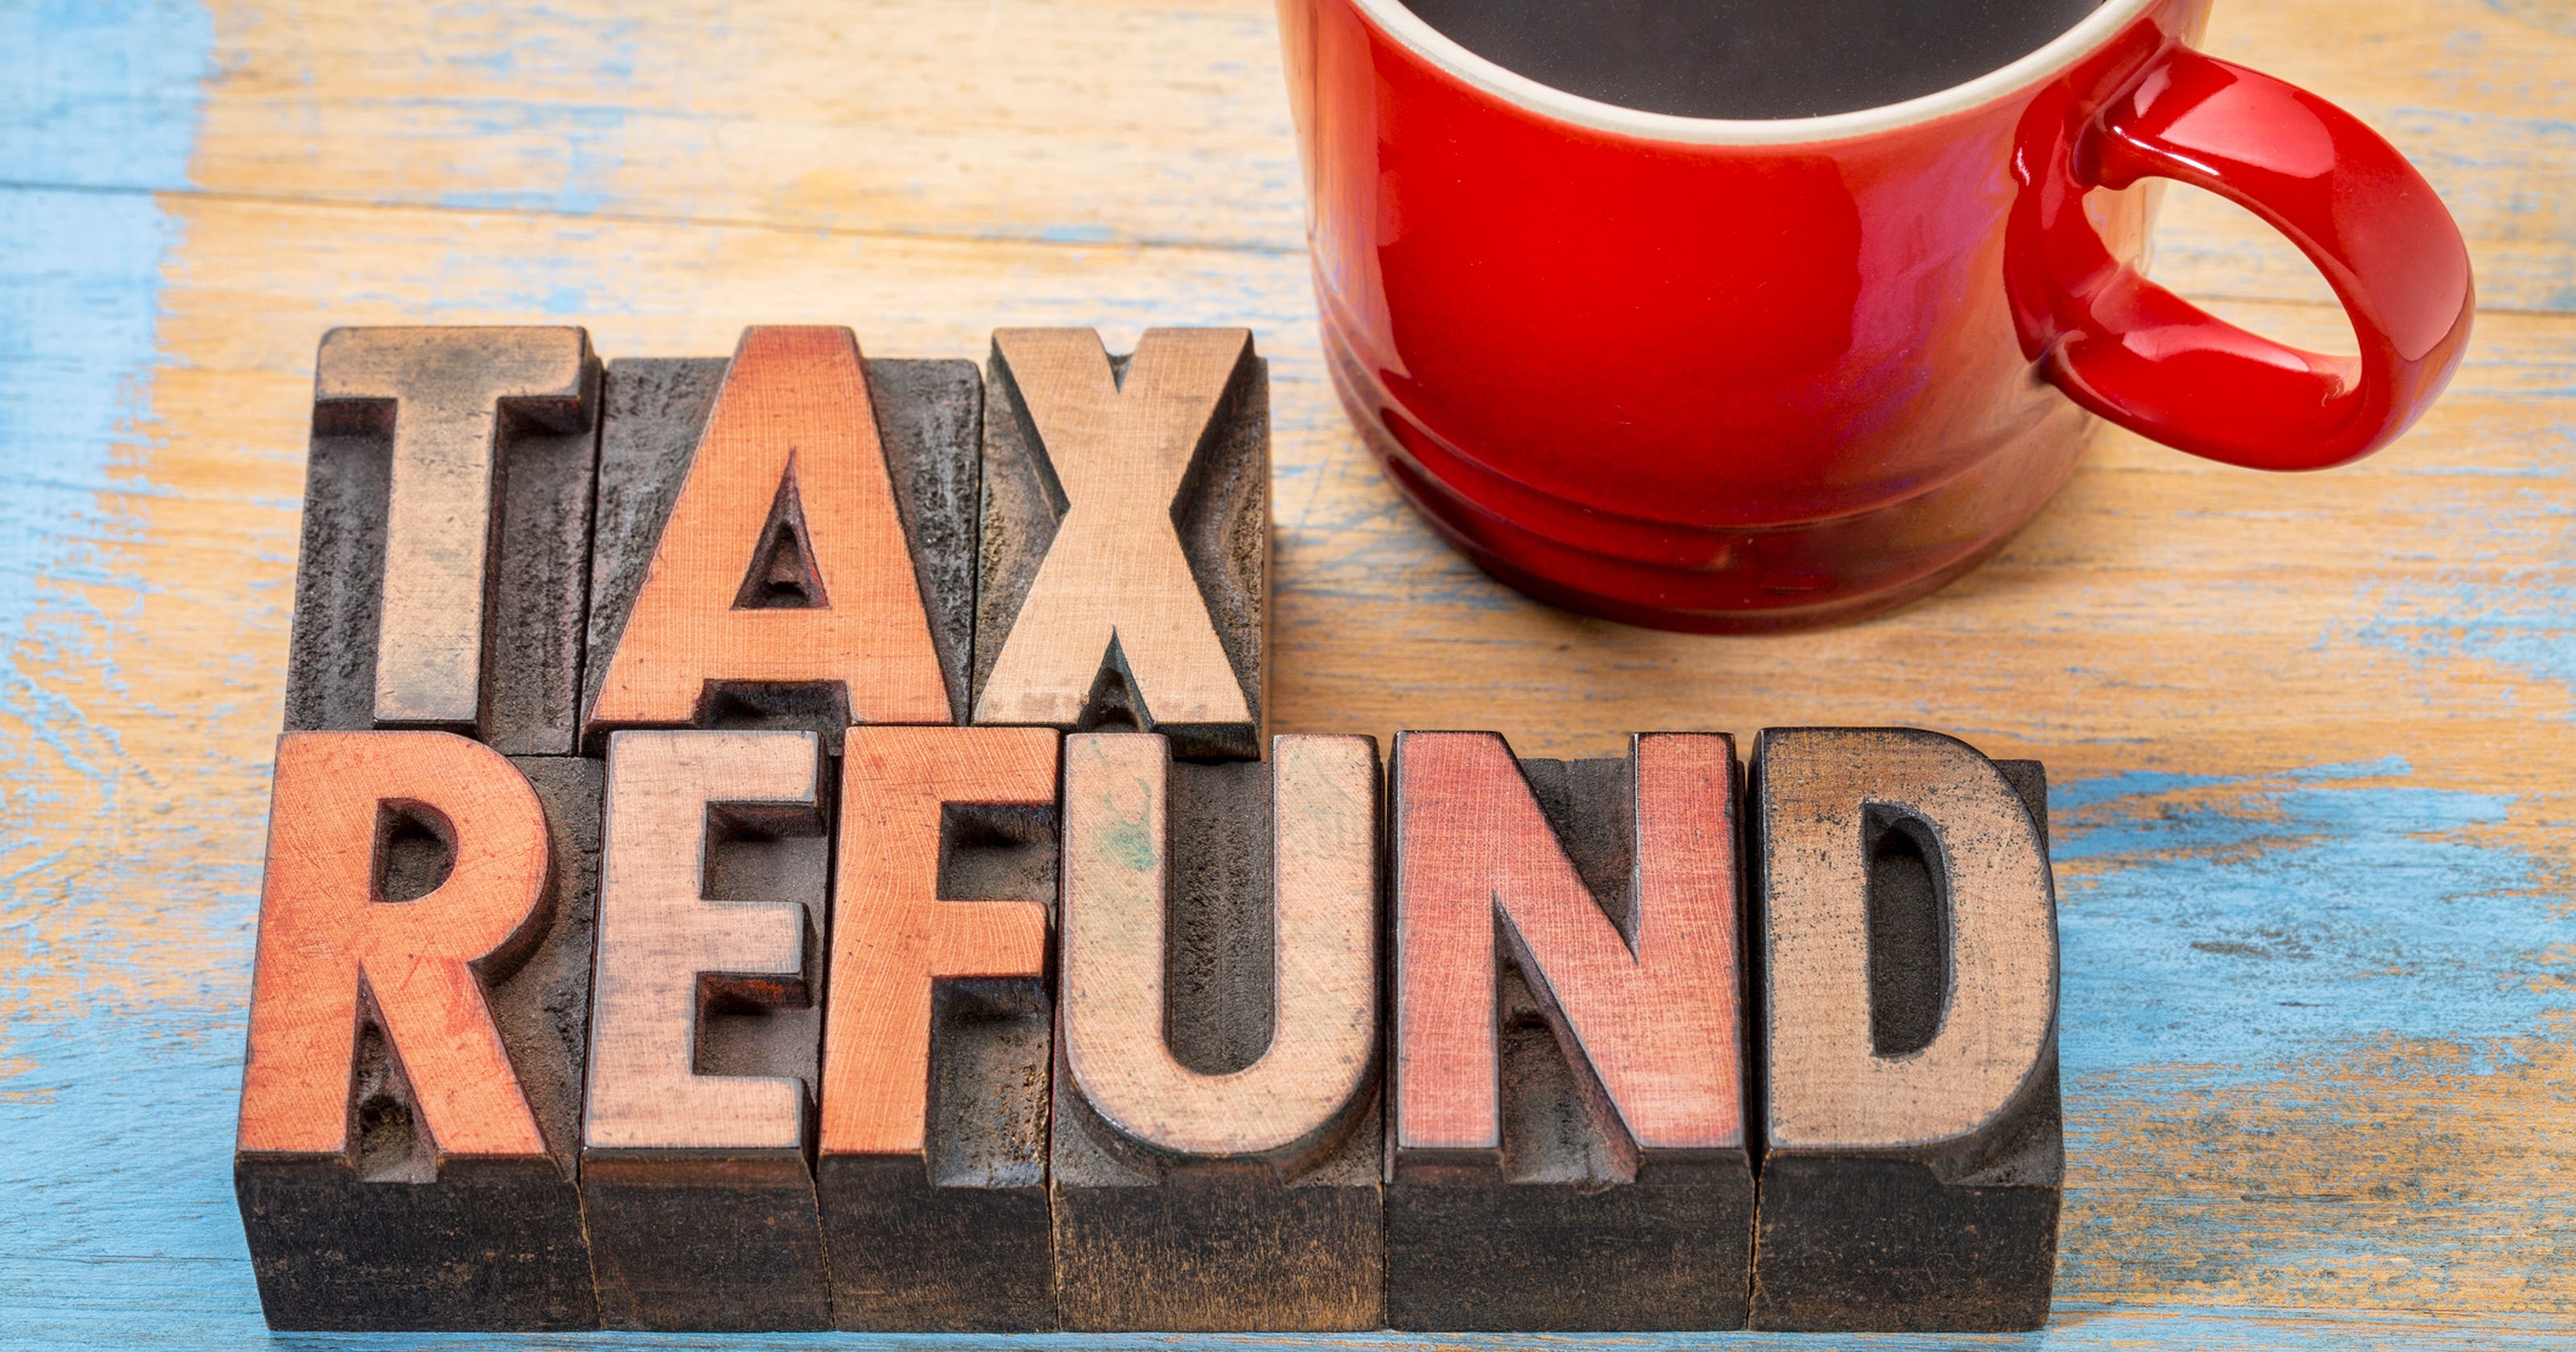 How Long Does Inland Revenue Take To Refund Tax